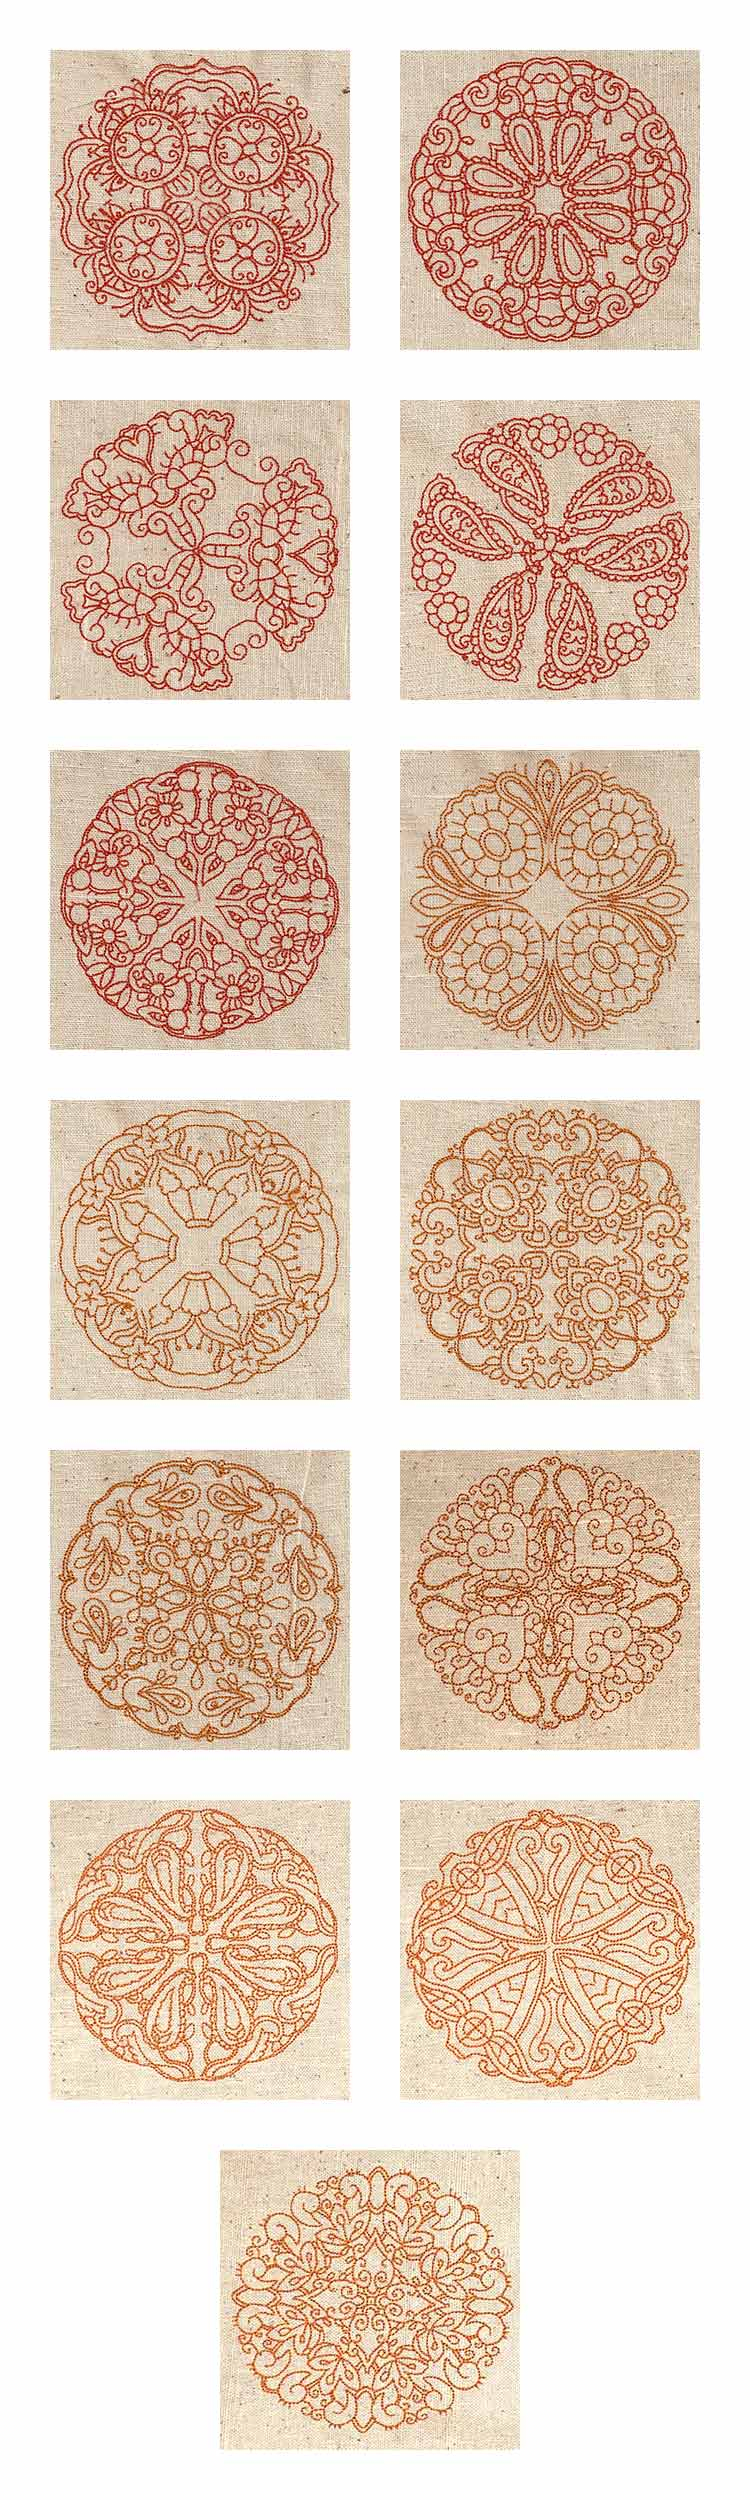 Indian Embroidery Patterns Free Indian Embroidery Designs Embroidery Origami